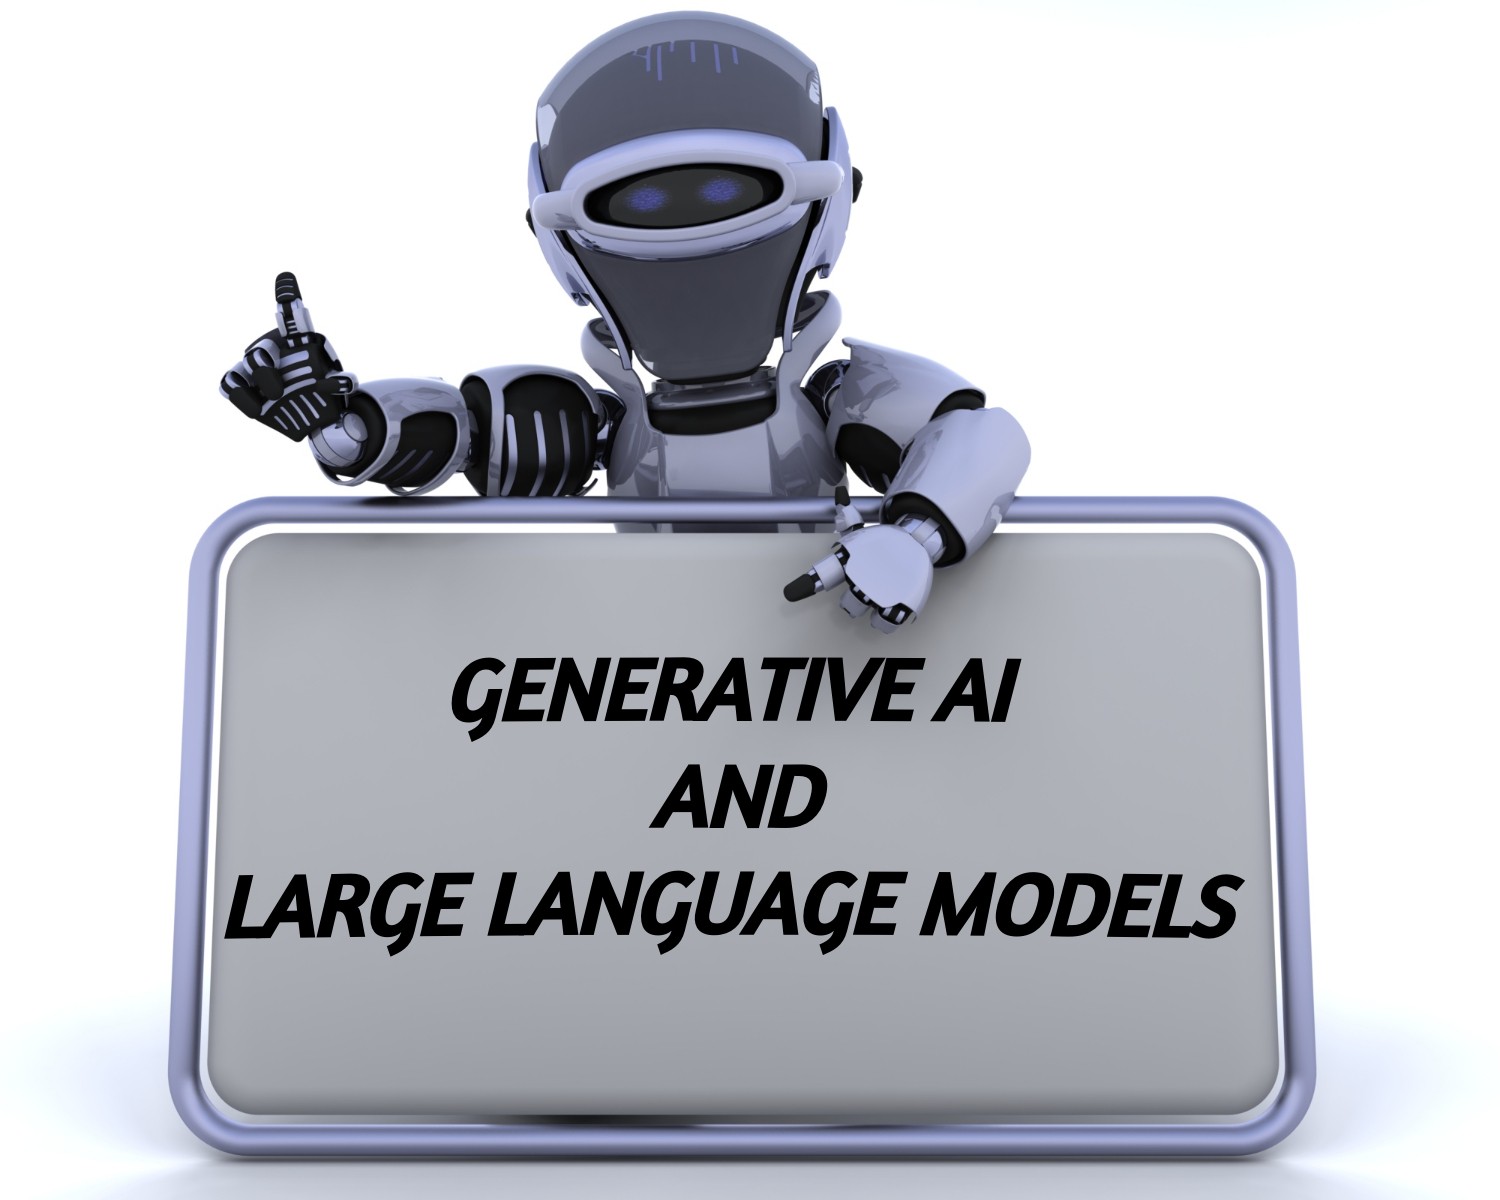 What is GenAI and LLM?